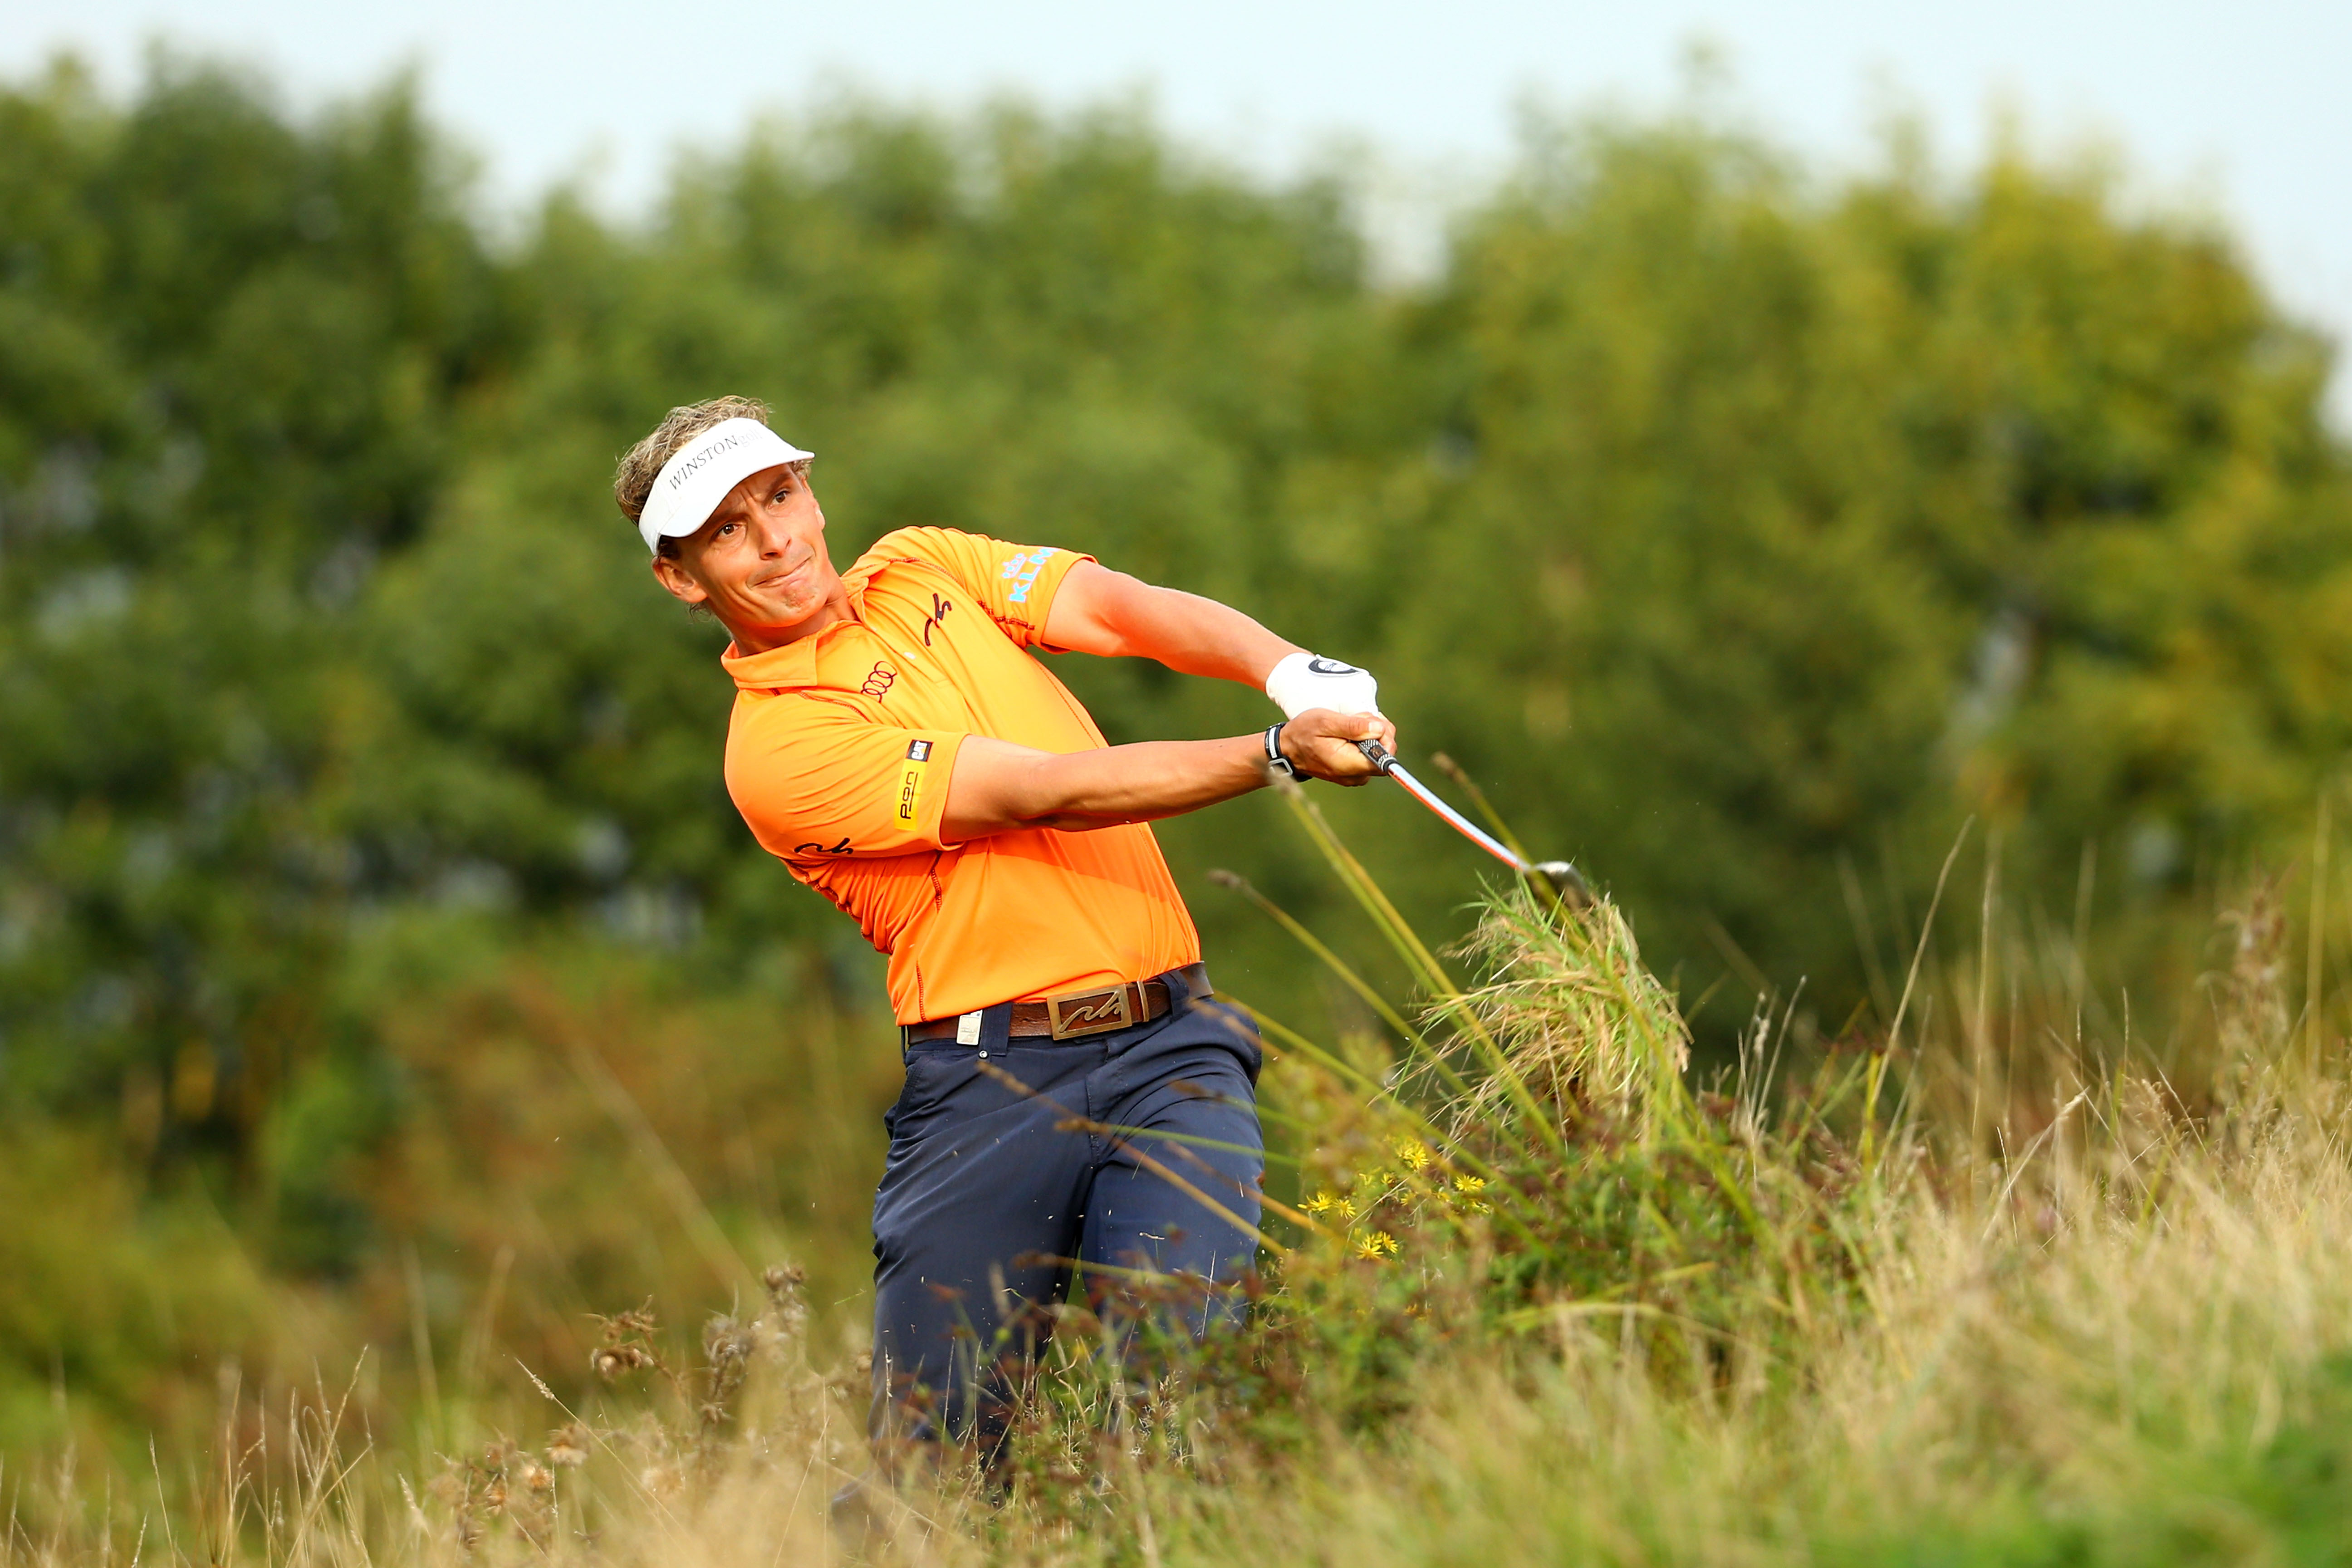 When in the thick rough, play like you're in a bunker, says Duncan Woolger (Photo: Getty Images)